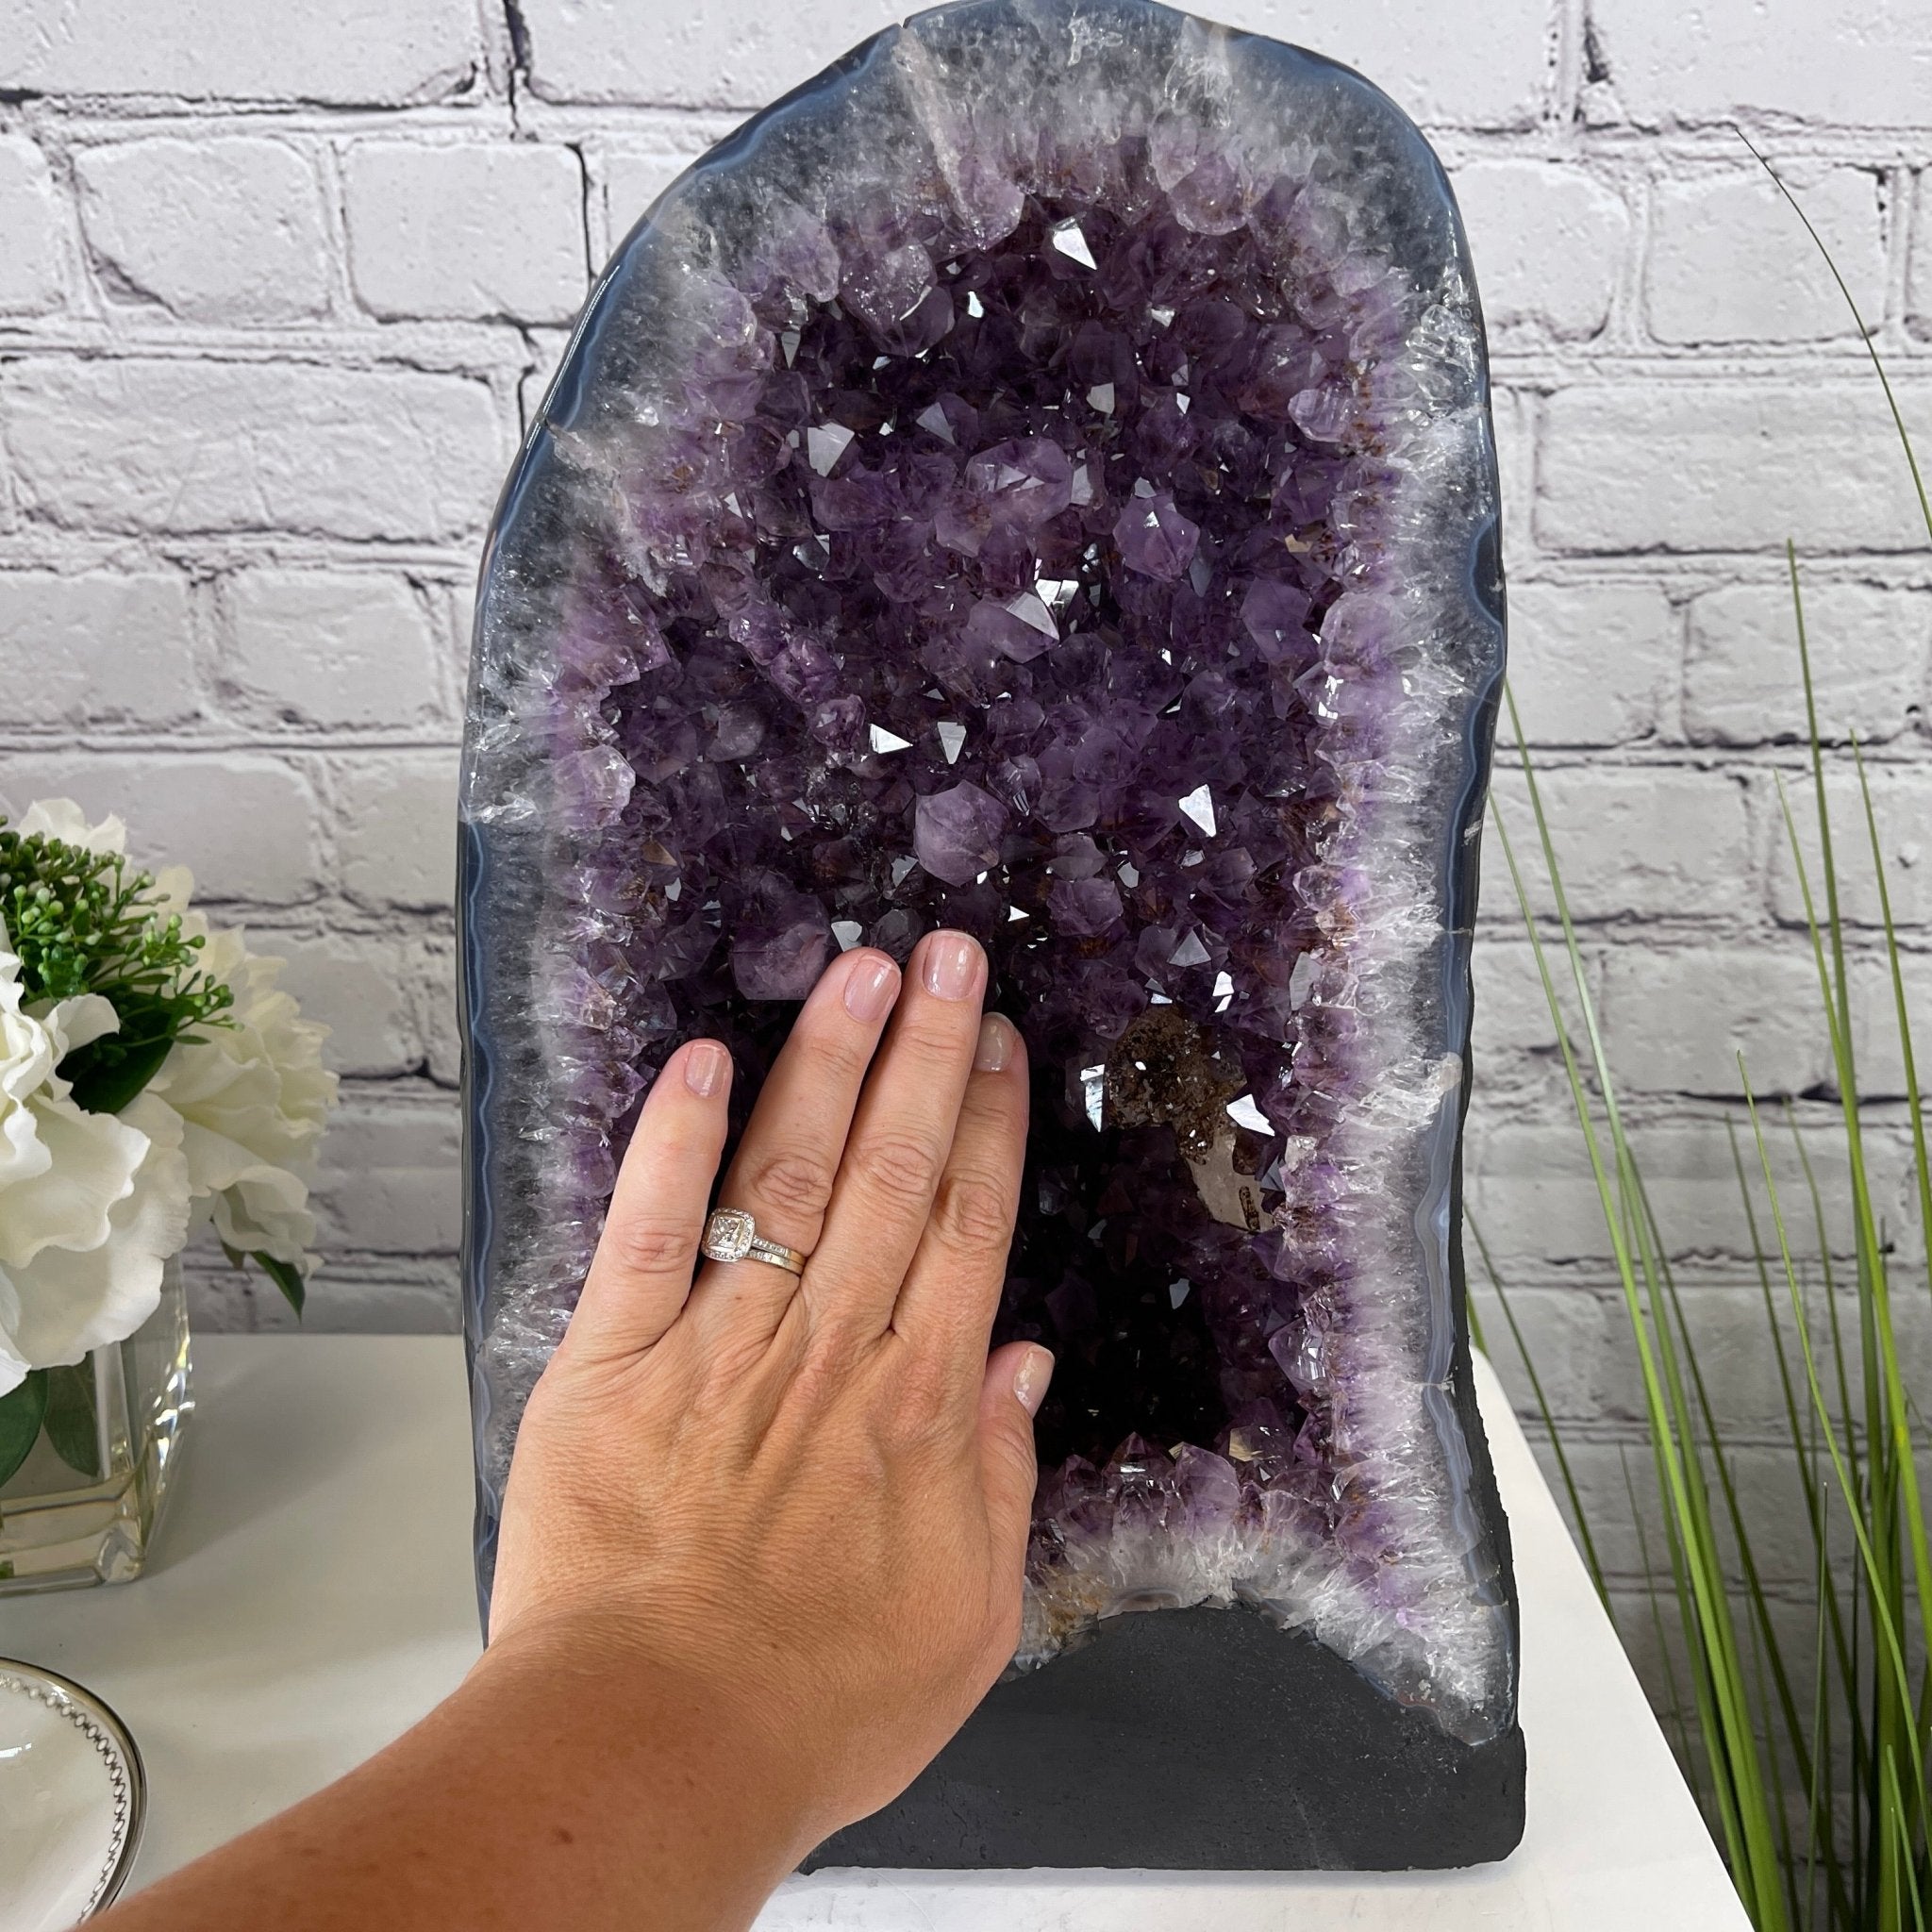 Extra Quality Brazilian Amethyst Cathedral, 15” tall & 27.9 lbs #5601-0477 by Brazil Gems - Brazil GemsBrazil GemsExtra Quality Brazilian Amethyst Cathedral, 15” tall & 27.9 lbs #5601-0477 by Brazil GemsCathedrals5601-0477